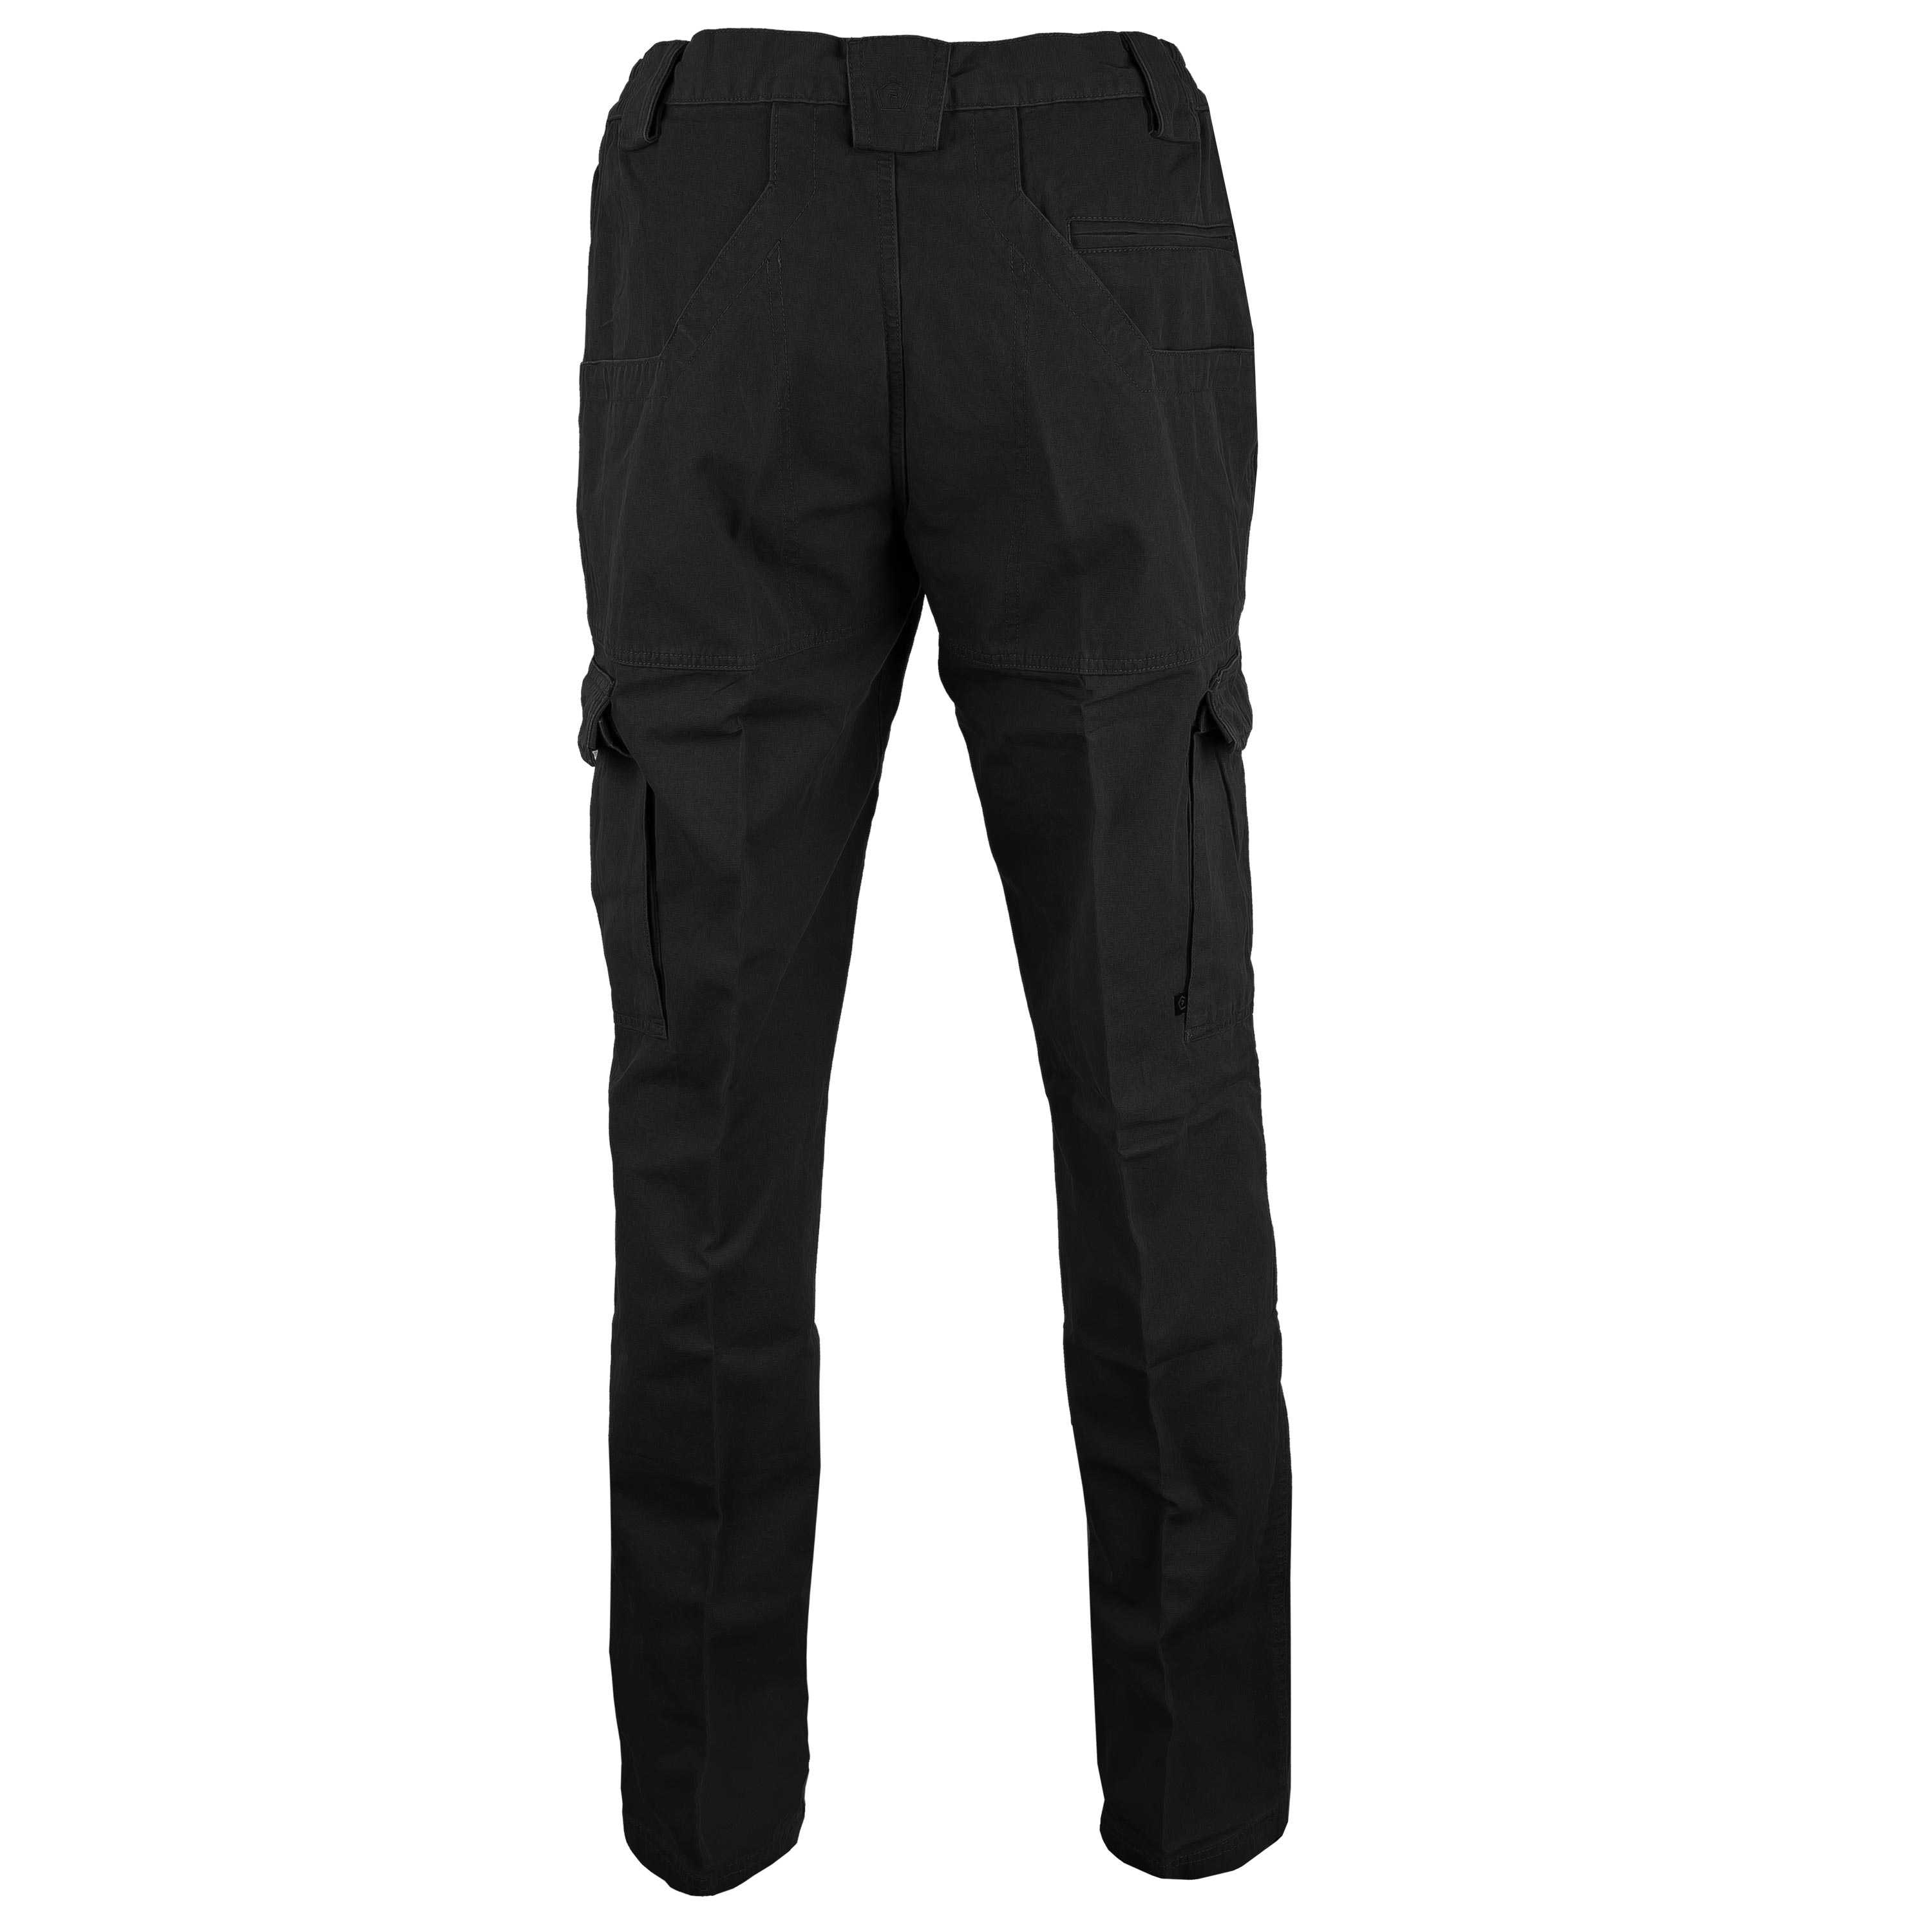 Purchase the Pentagon Pants Elgon 3.0 Tactical black by ASMC